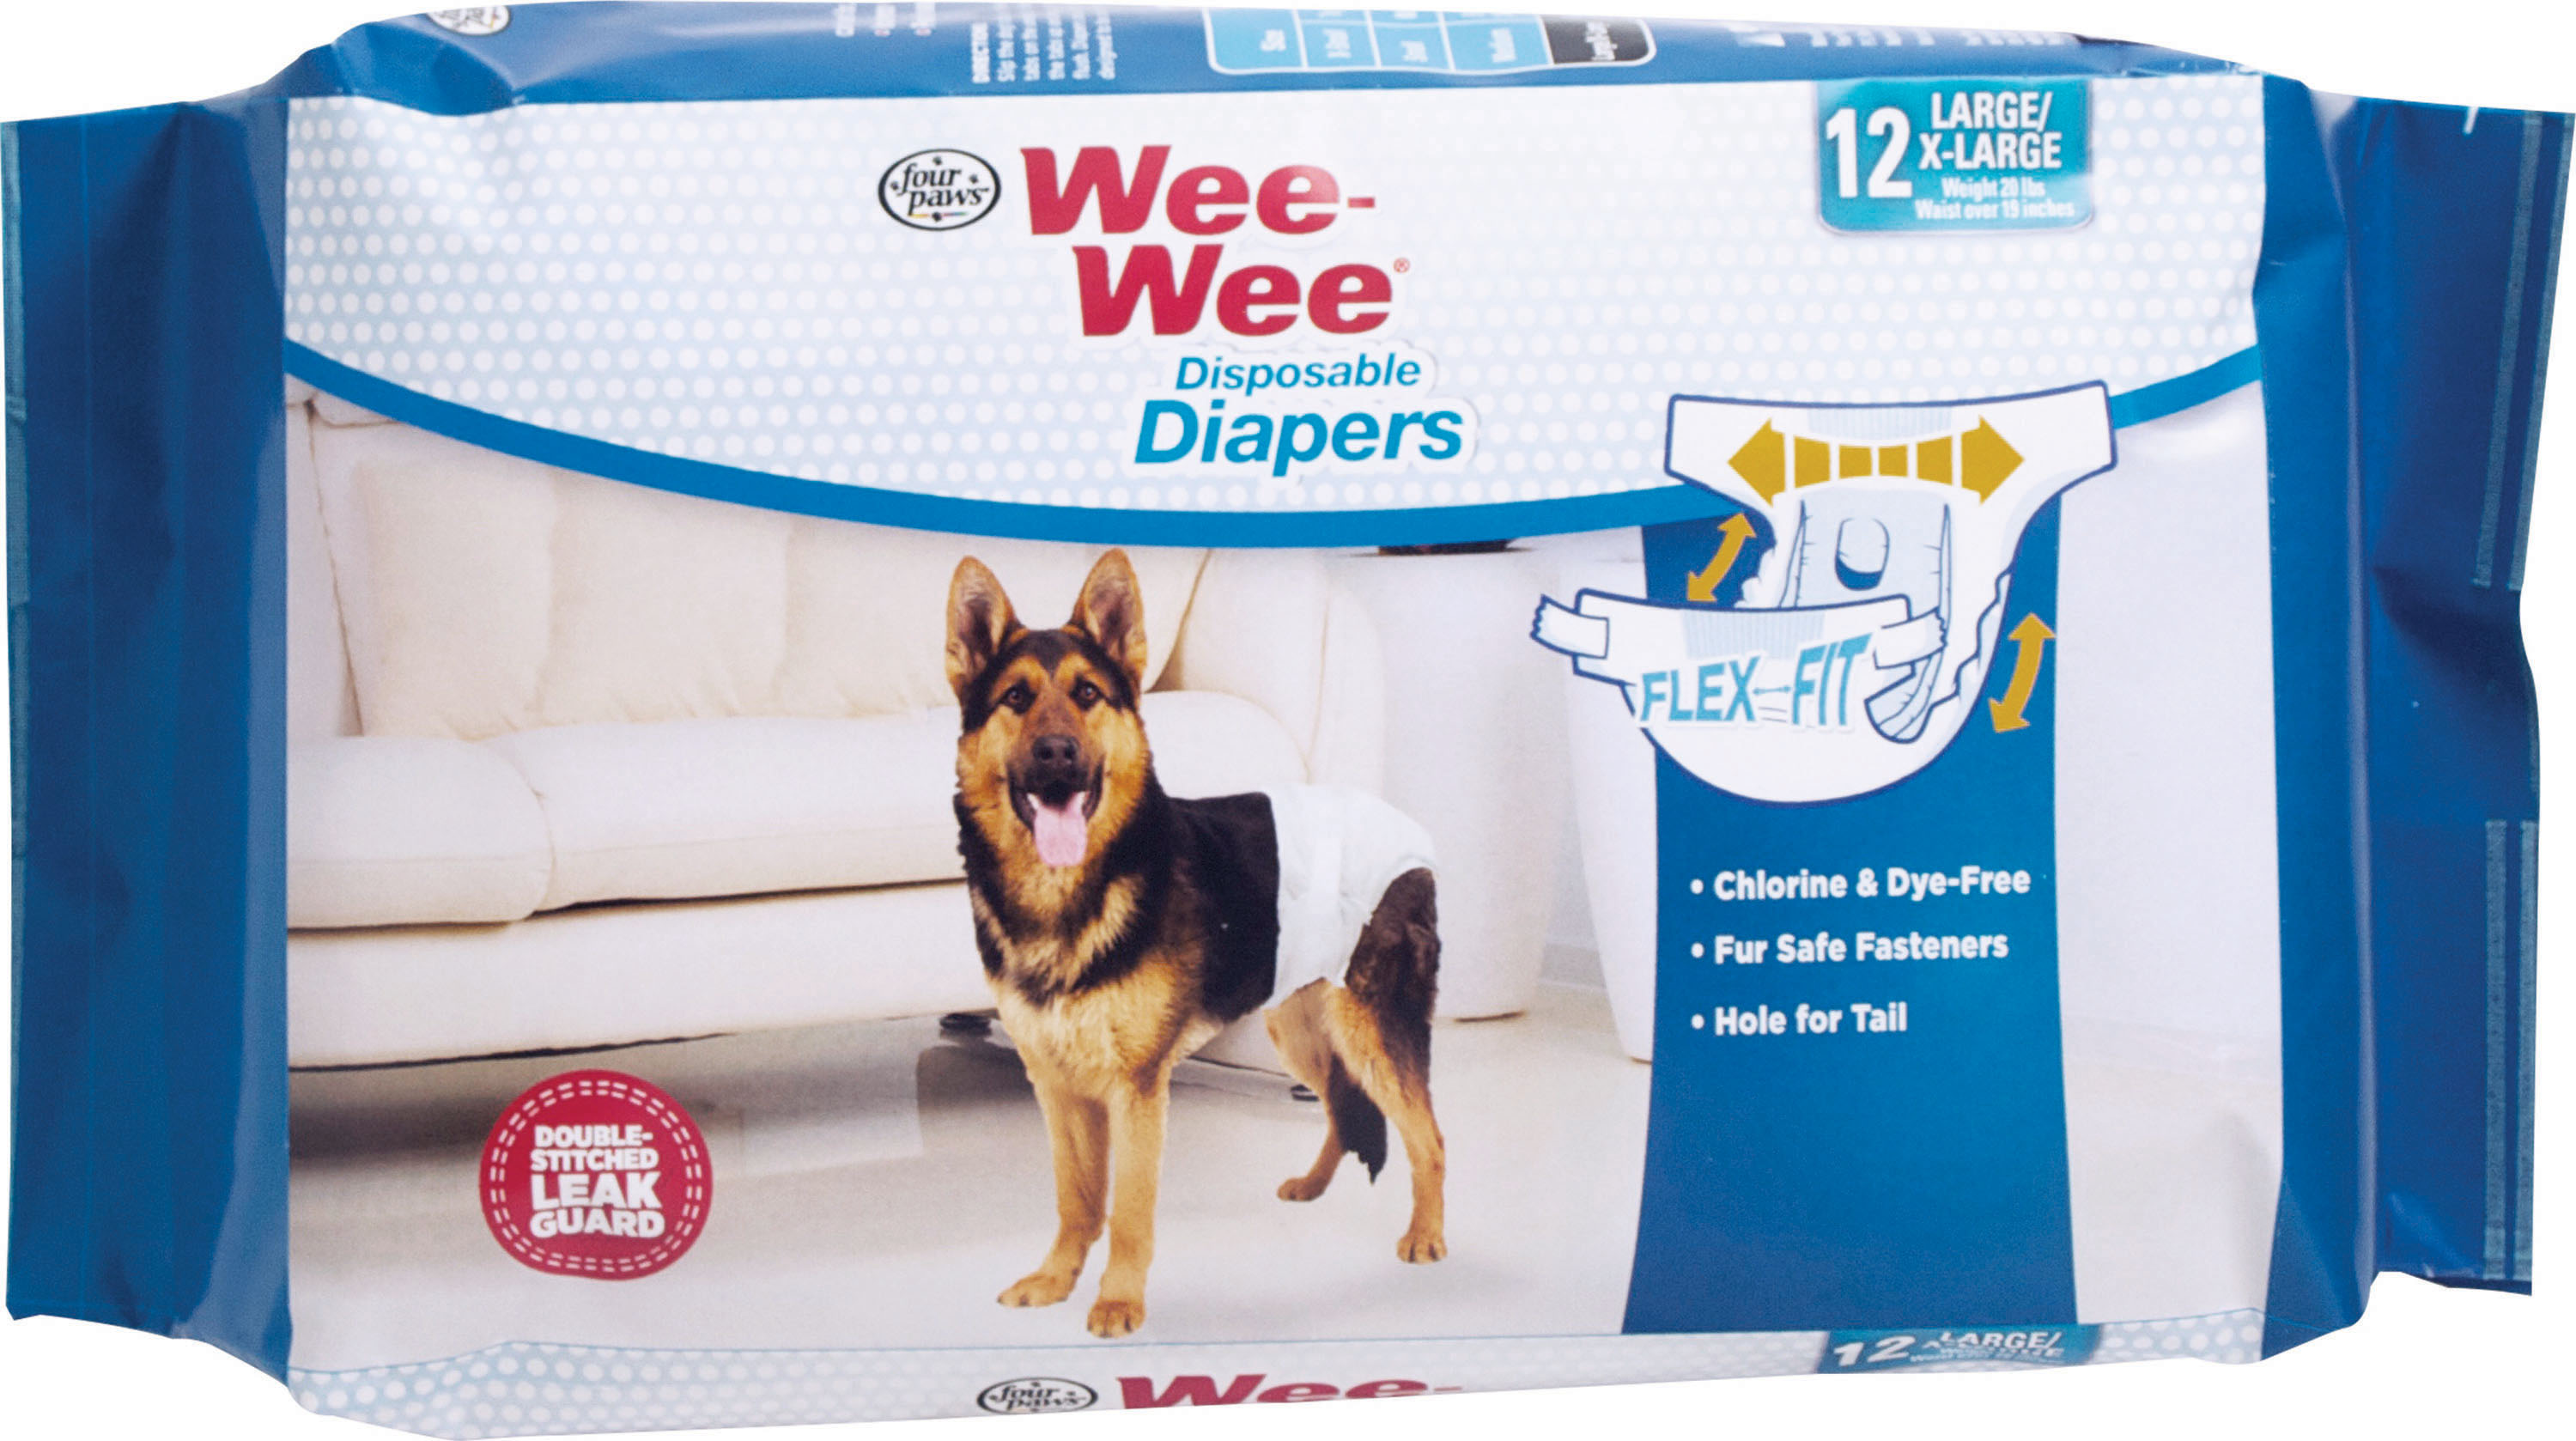 Wee-wee Disposable Diapers (Option 1: Large/xlarge)